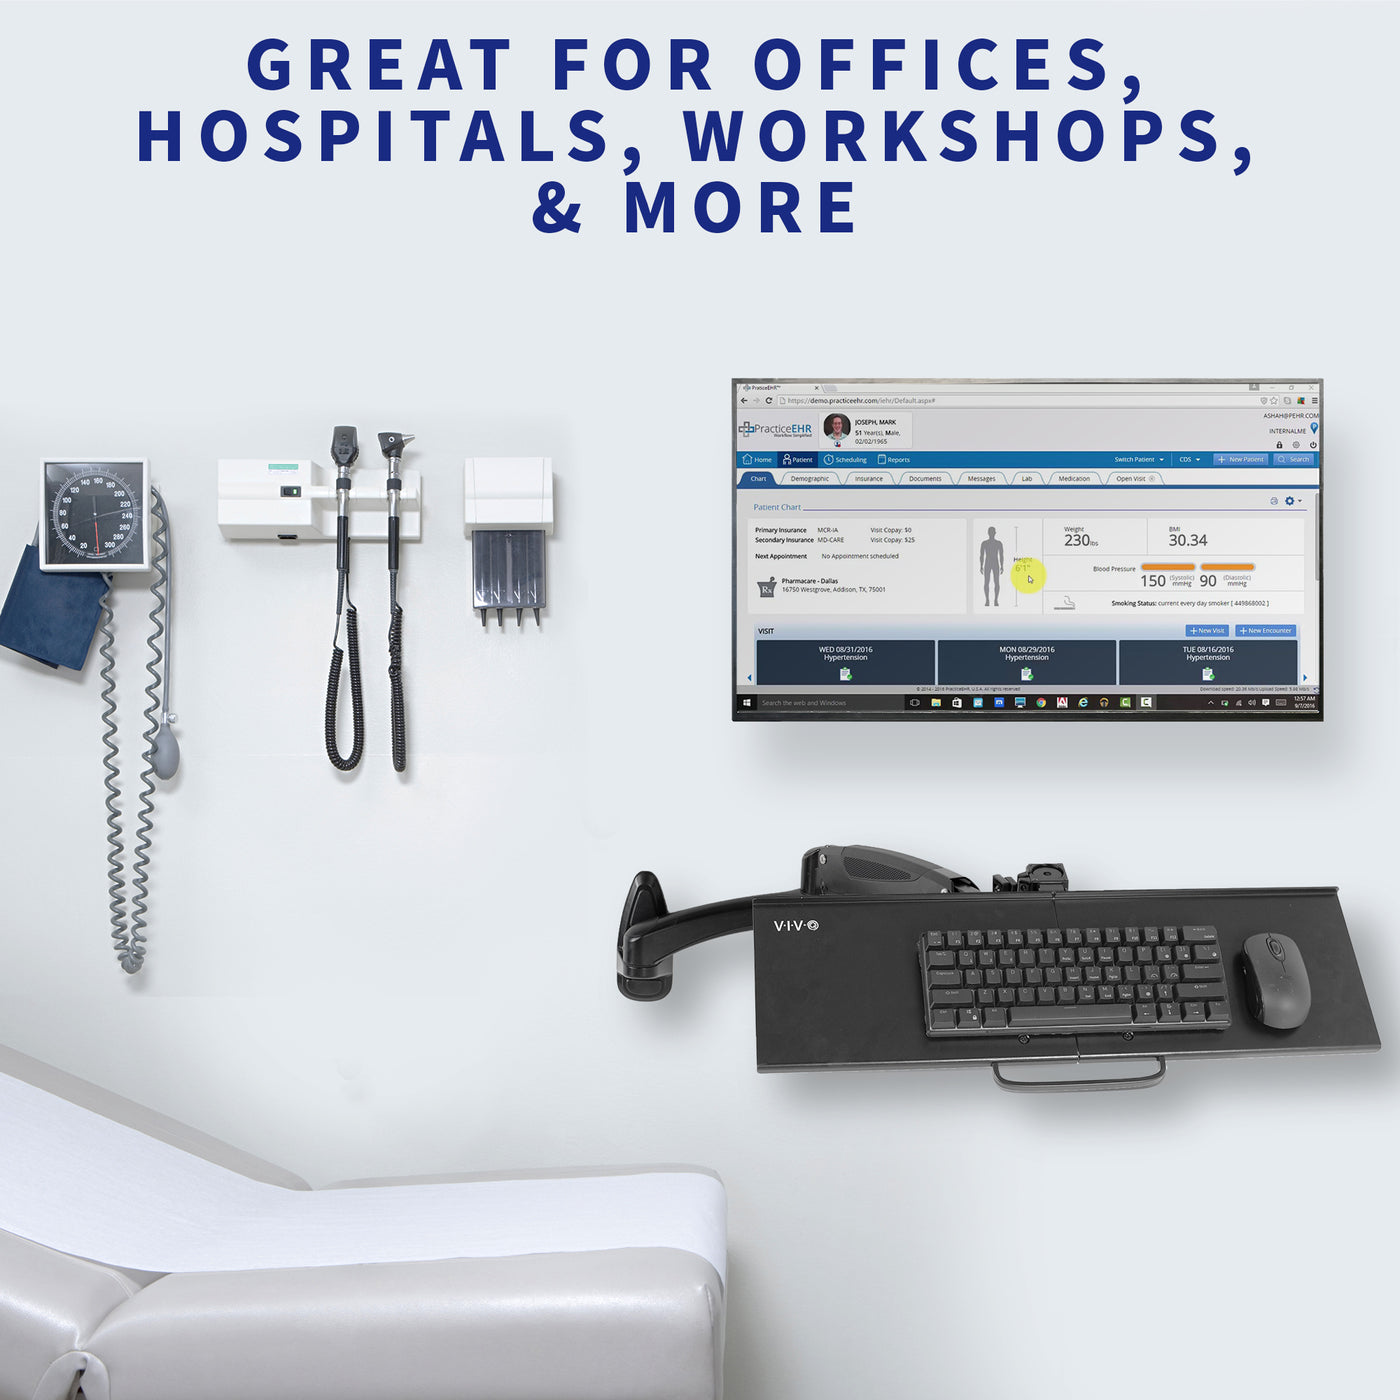 The wall mount keyboard is ideal for medical office rooms.